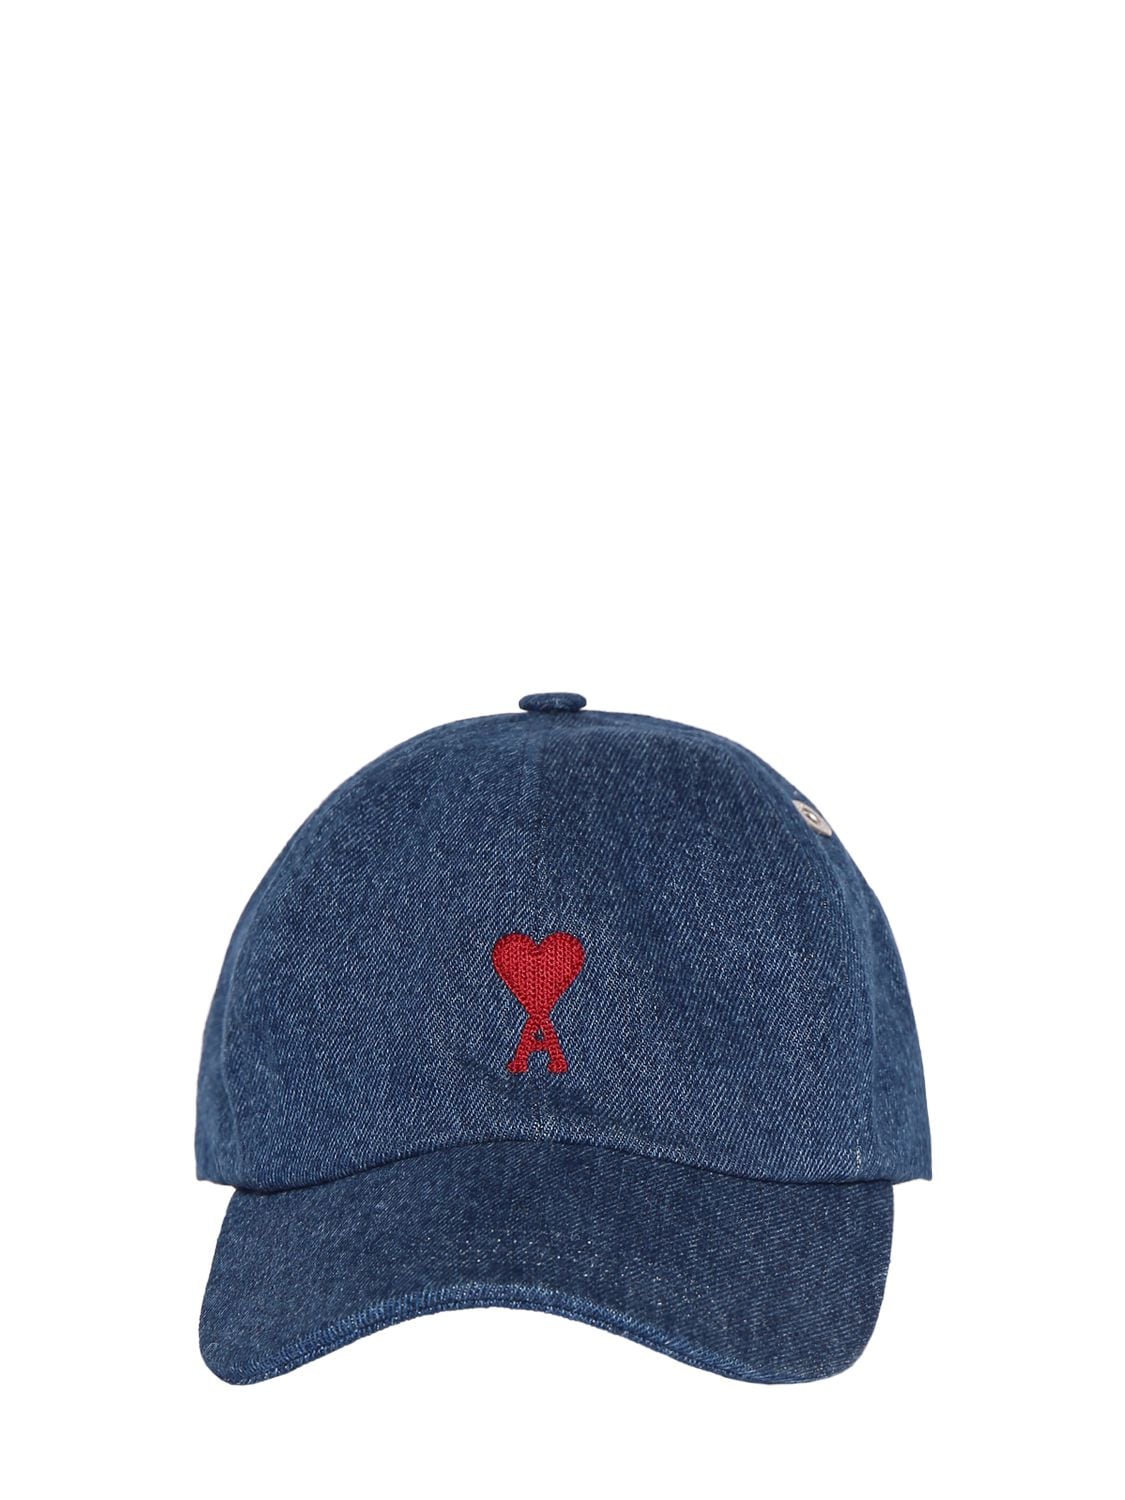 Adc Embroidery Cotton Cap – WOMEN > ACCESSORIES > HATS